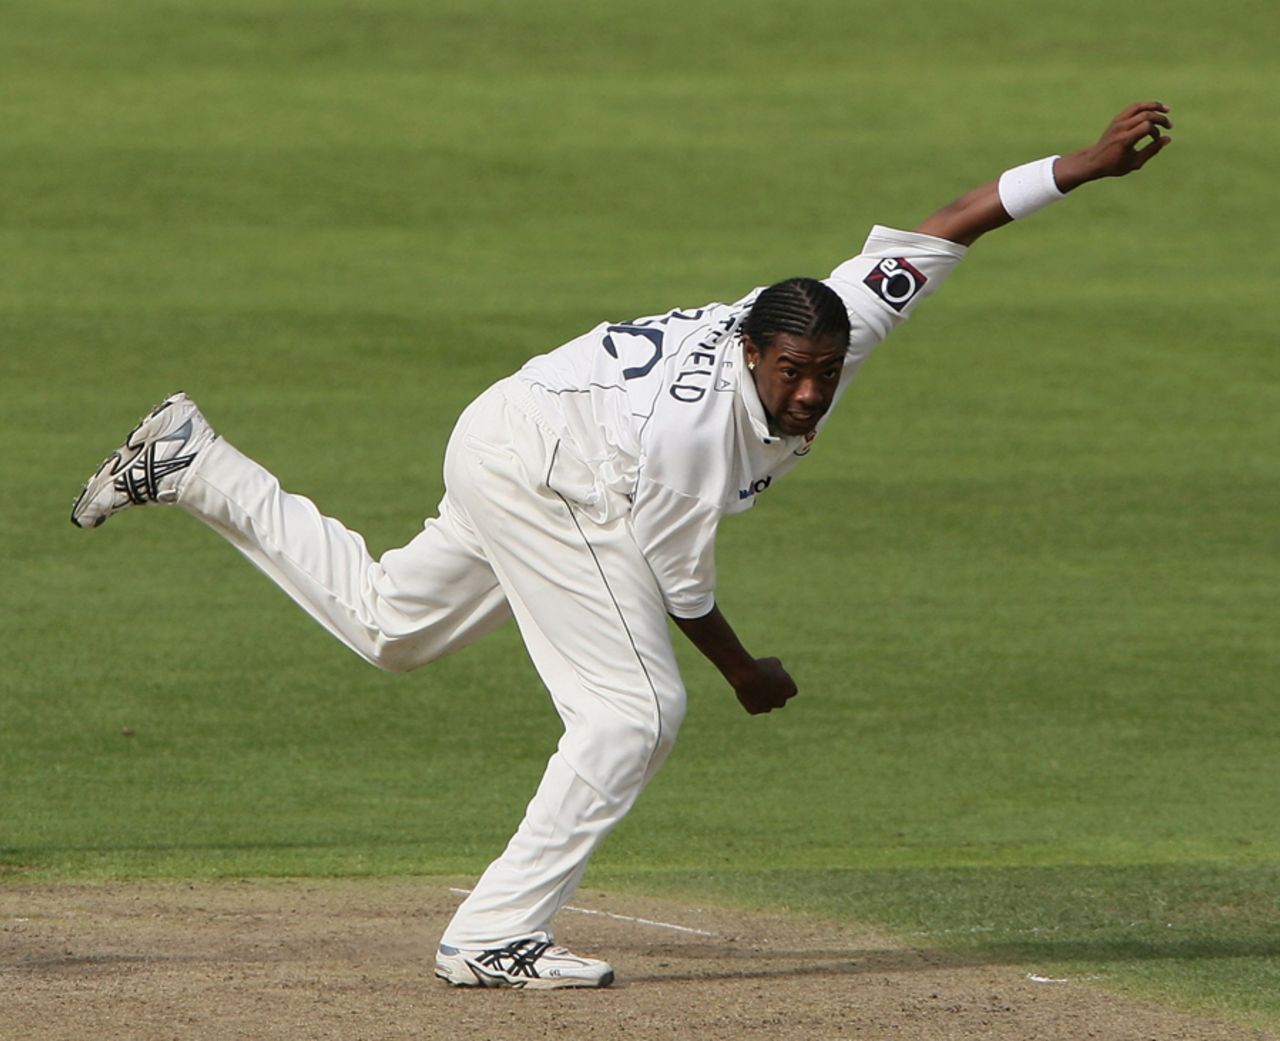 Mervyn Westfield in action, Worcestershire v Essex, County Championship, August 30, 2006